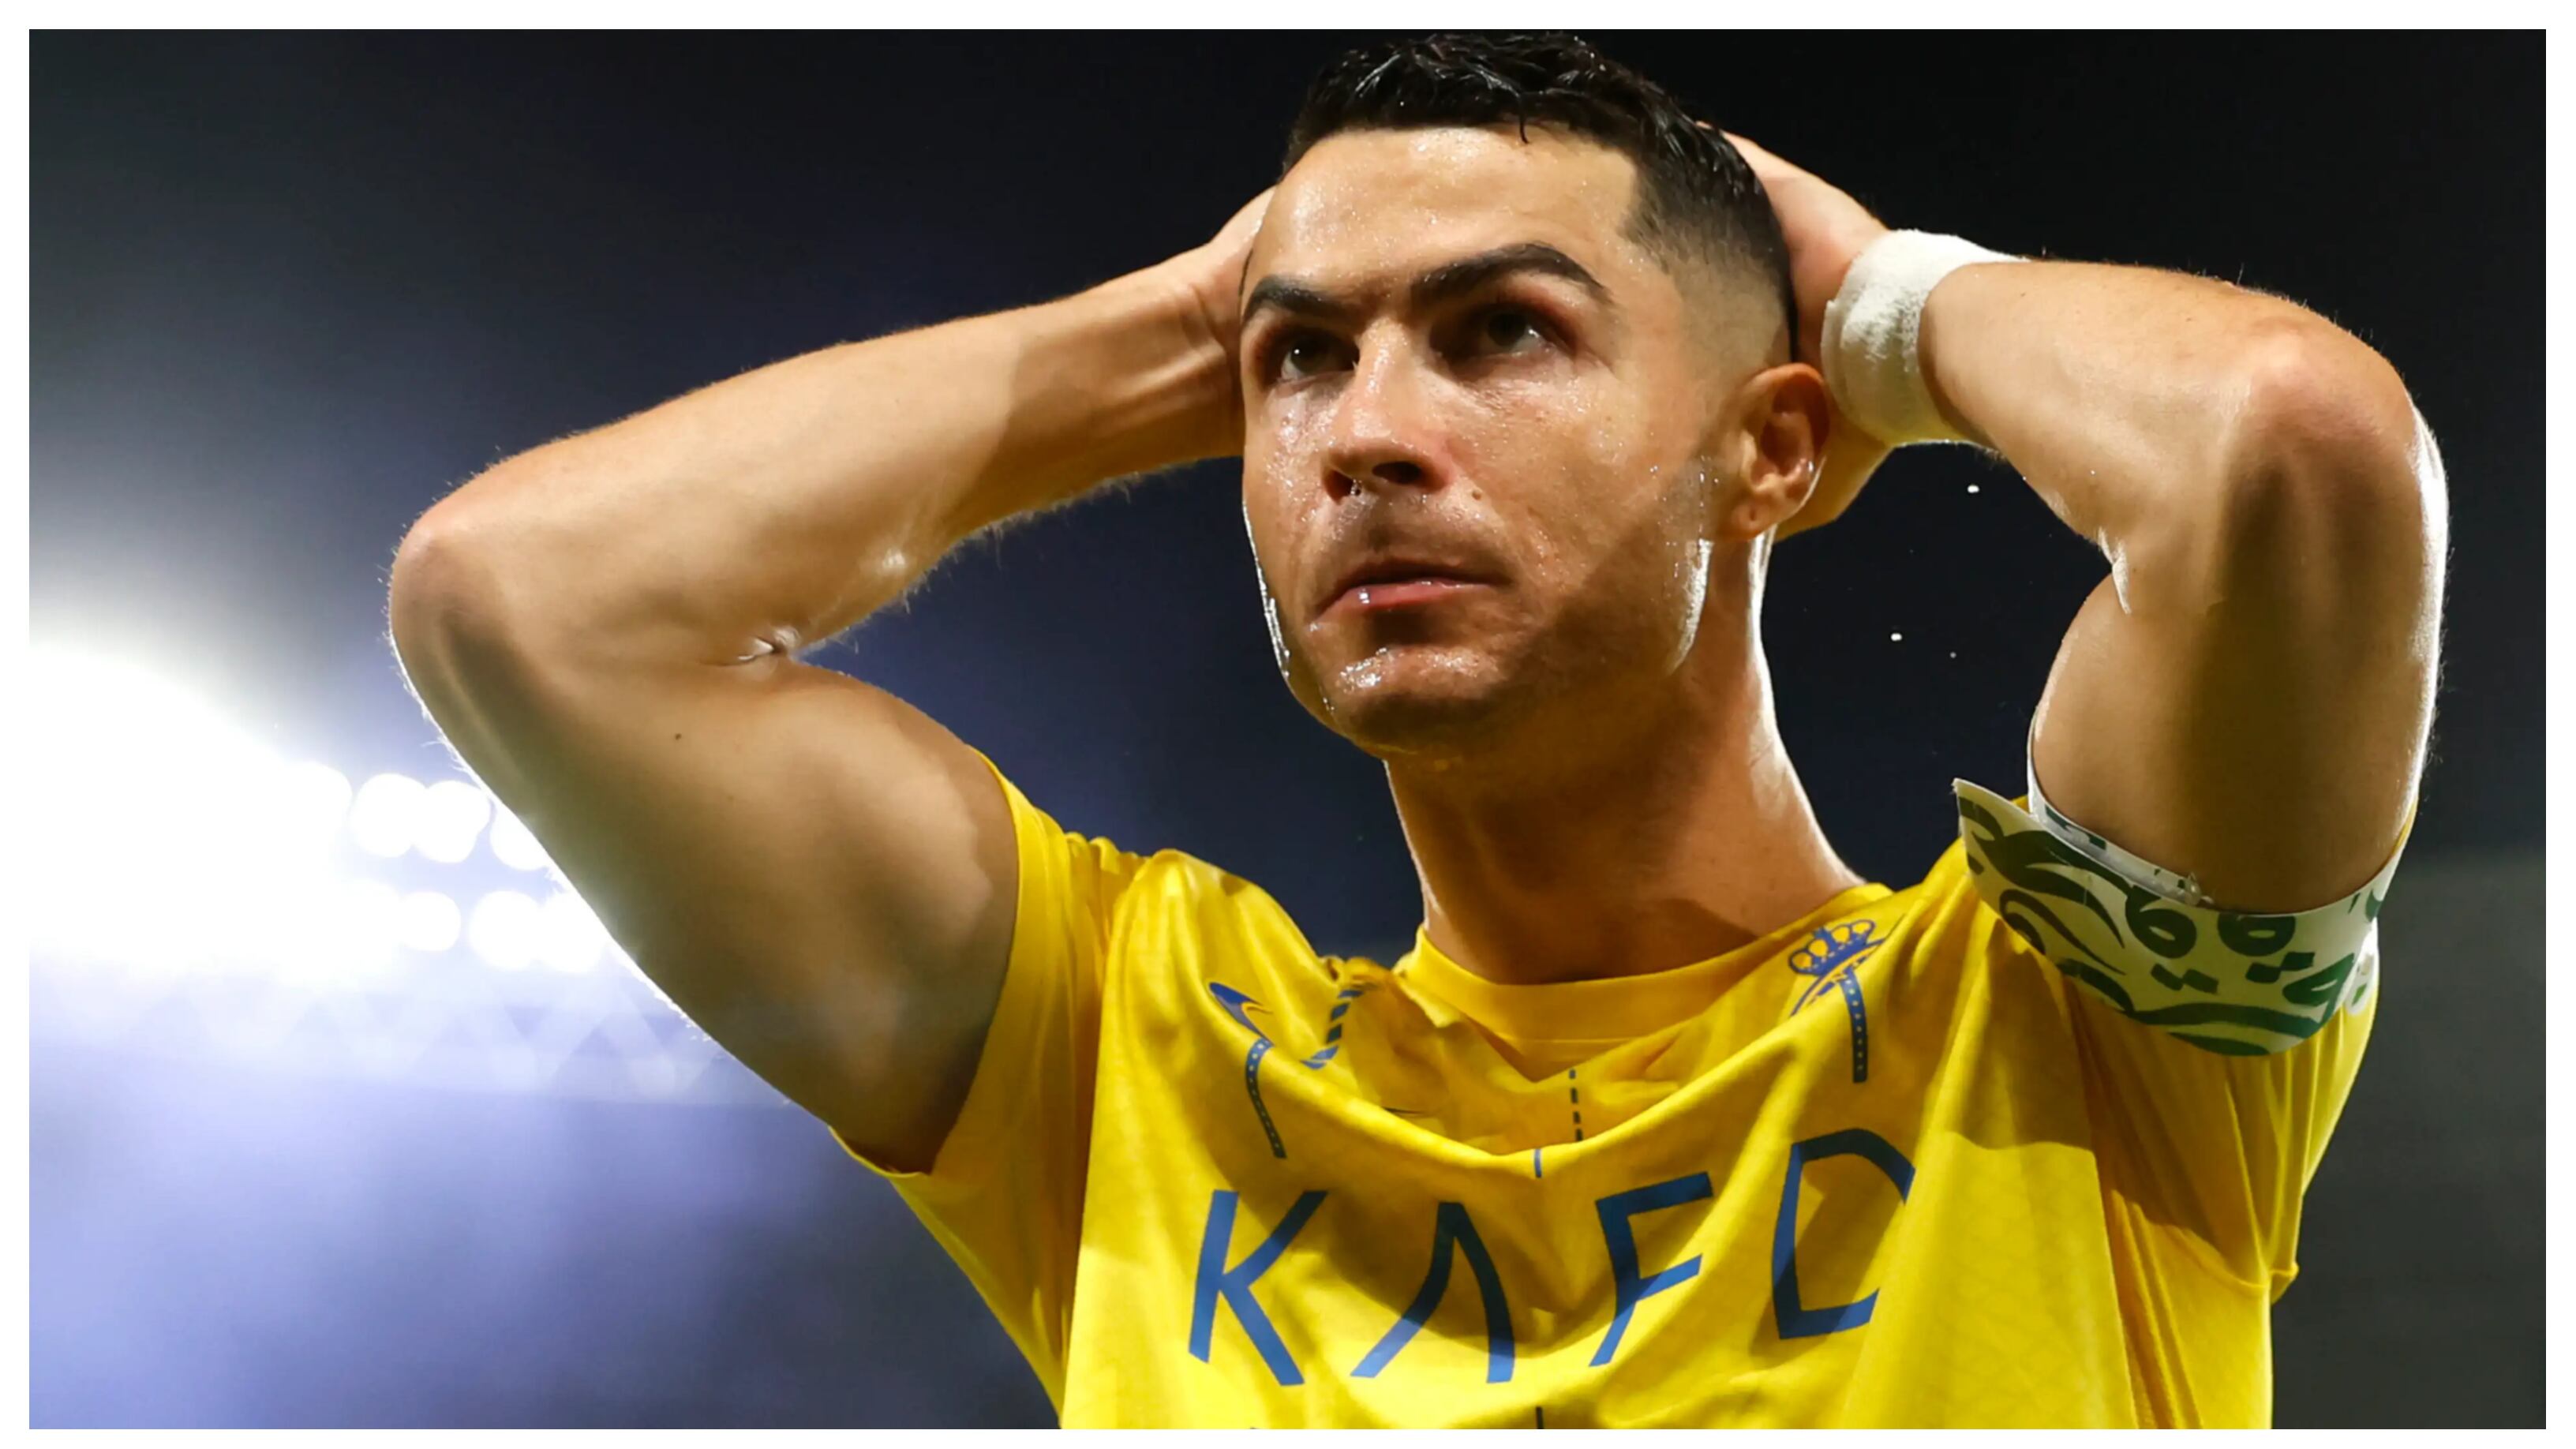 Cristiano Ronaldo wanted him out of Al Nassr, now he wants to win Liga MX again